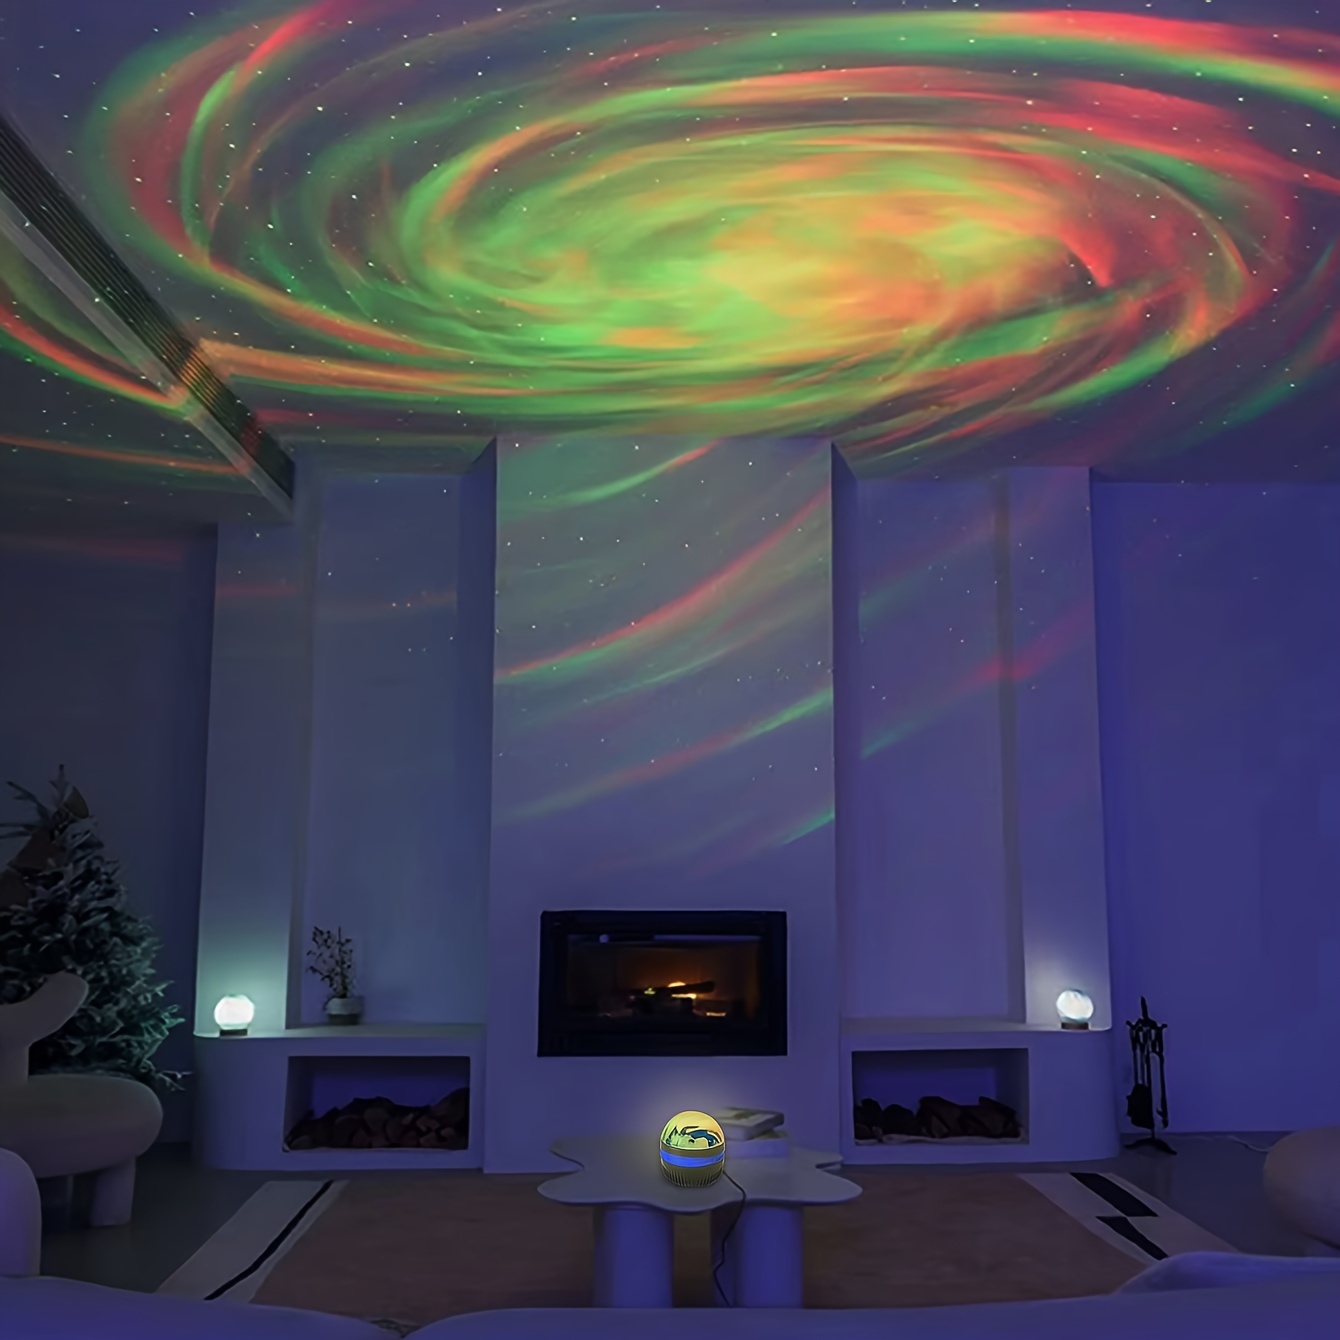 bring the ultimate visual experience to this galaxy projector led galaxy universe projection light multi color and remote control galaxy starry sky projector bedroom nightlight projector adult game room room decoration christmas gift decoration valentines day gift camping wedding decoration usb powered details 1